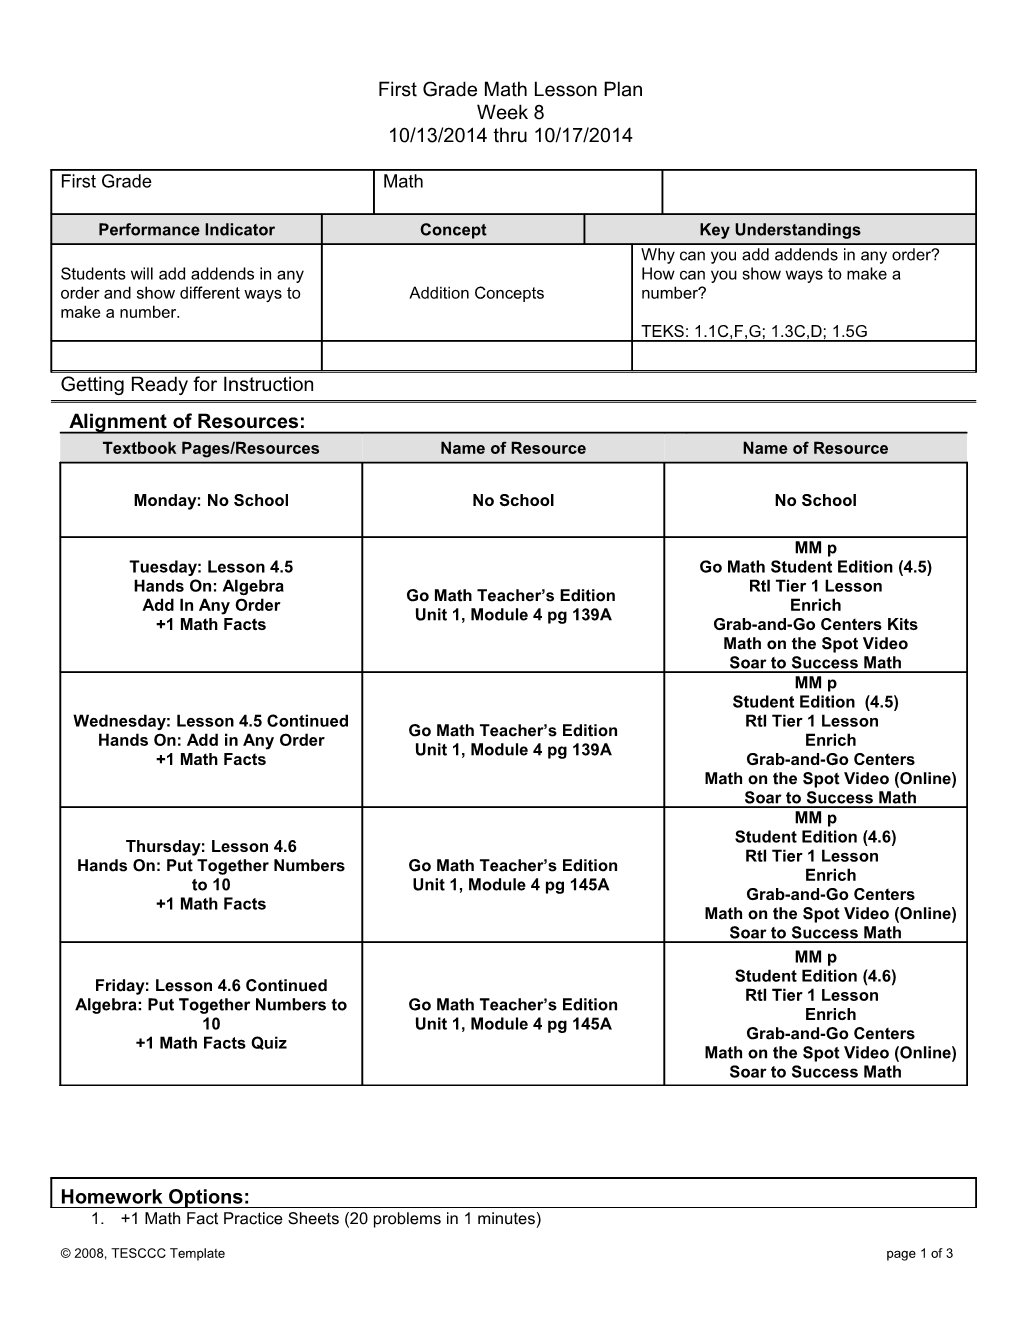 Cscope Lesson Plan Template s2